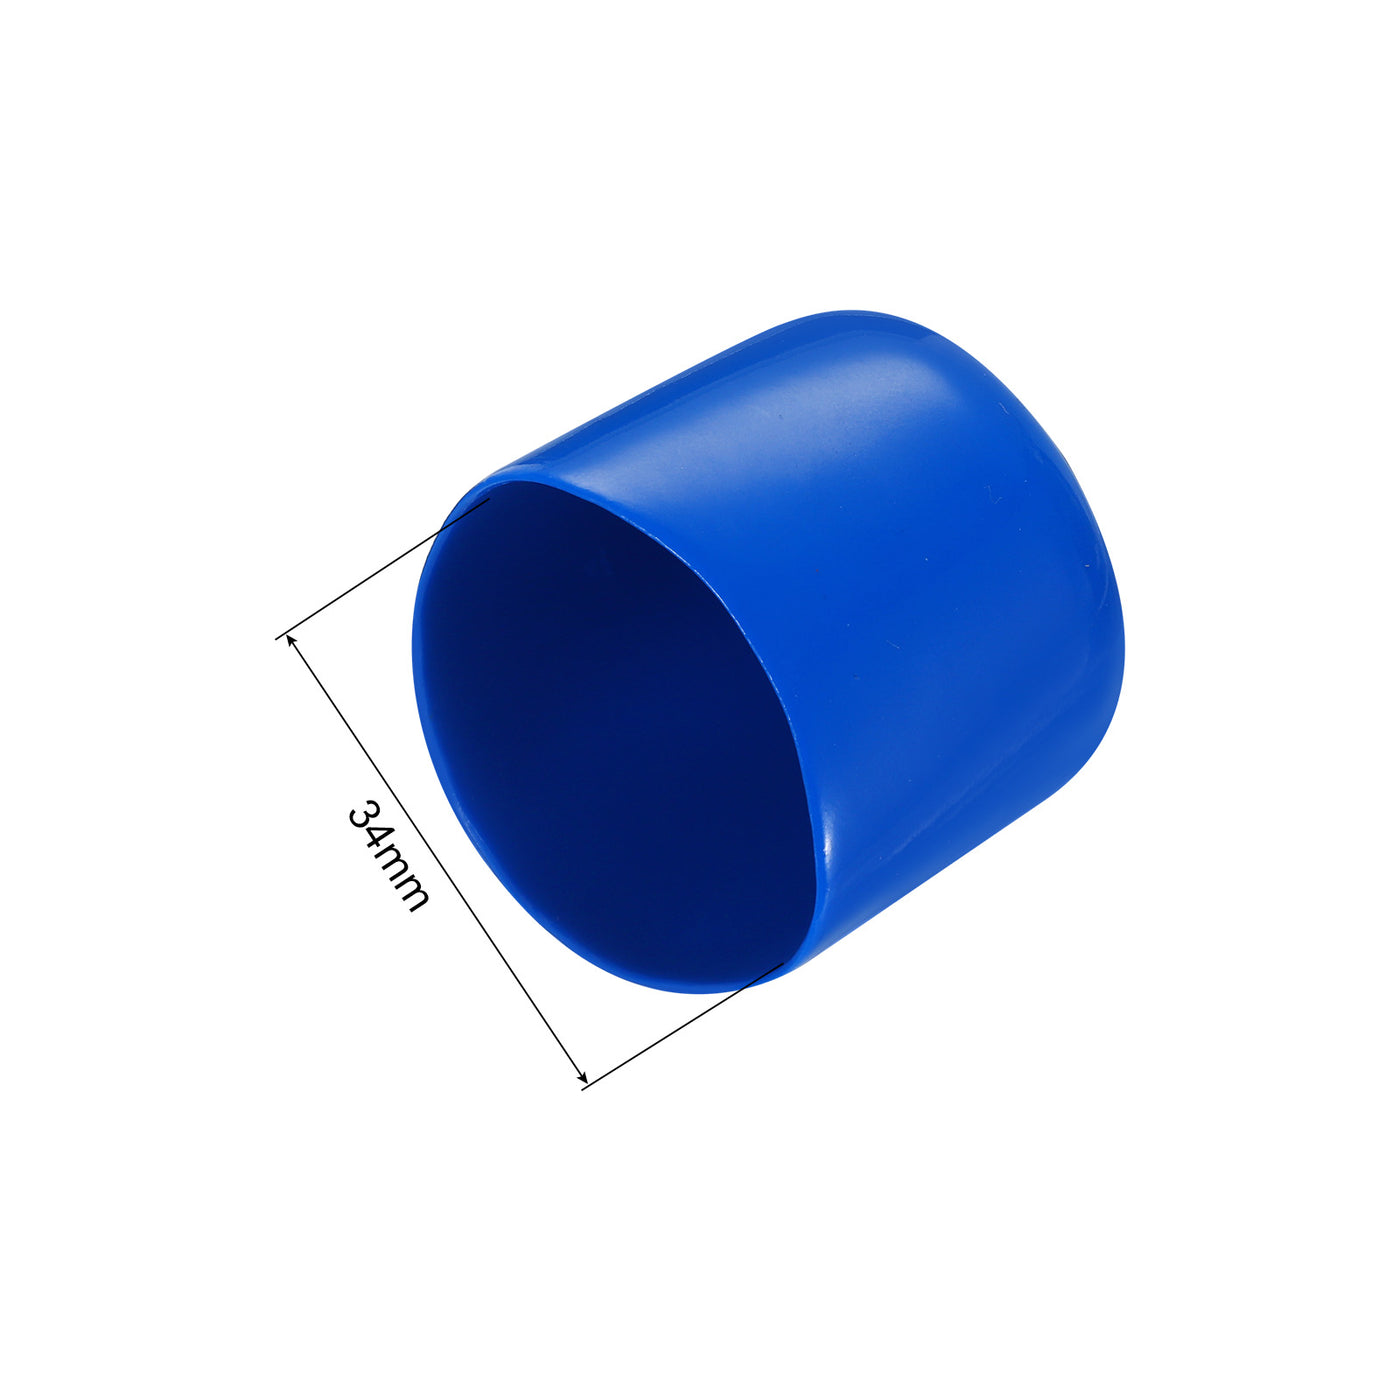 uxcell Uxcell 10pcs Rubber End Caps 34mm ID Vinyl Round End Cap Cover Screw Thread Protectors Blue